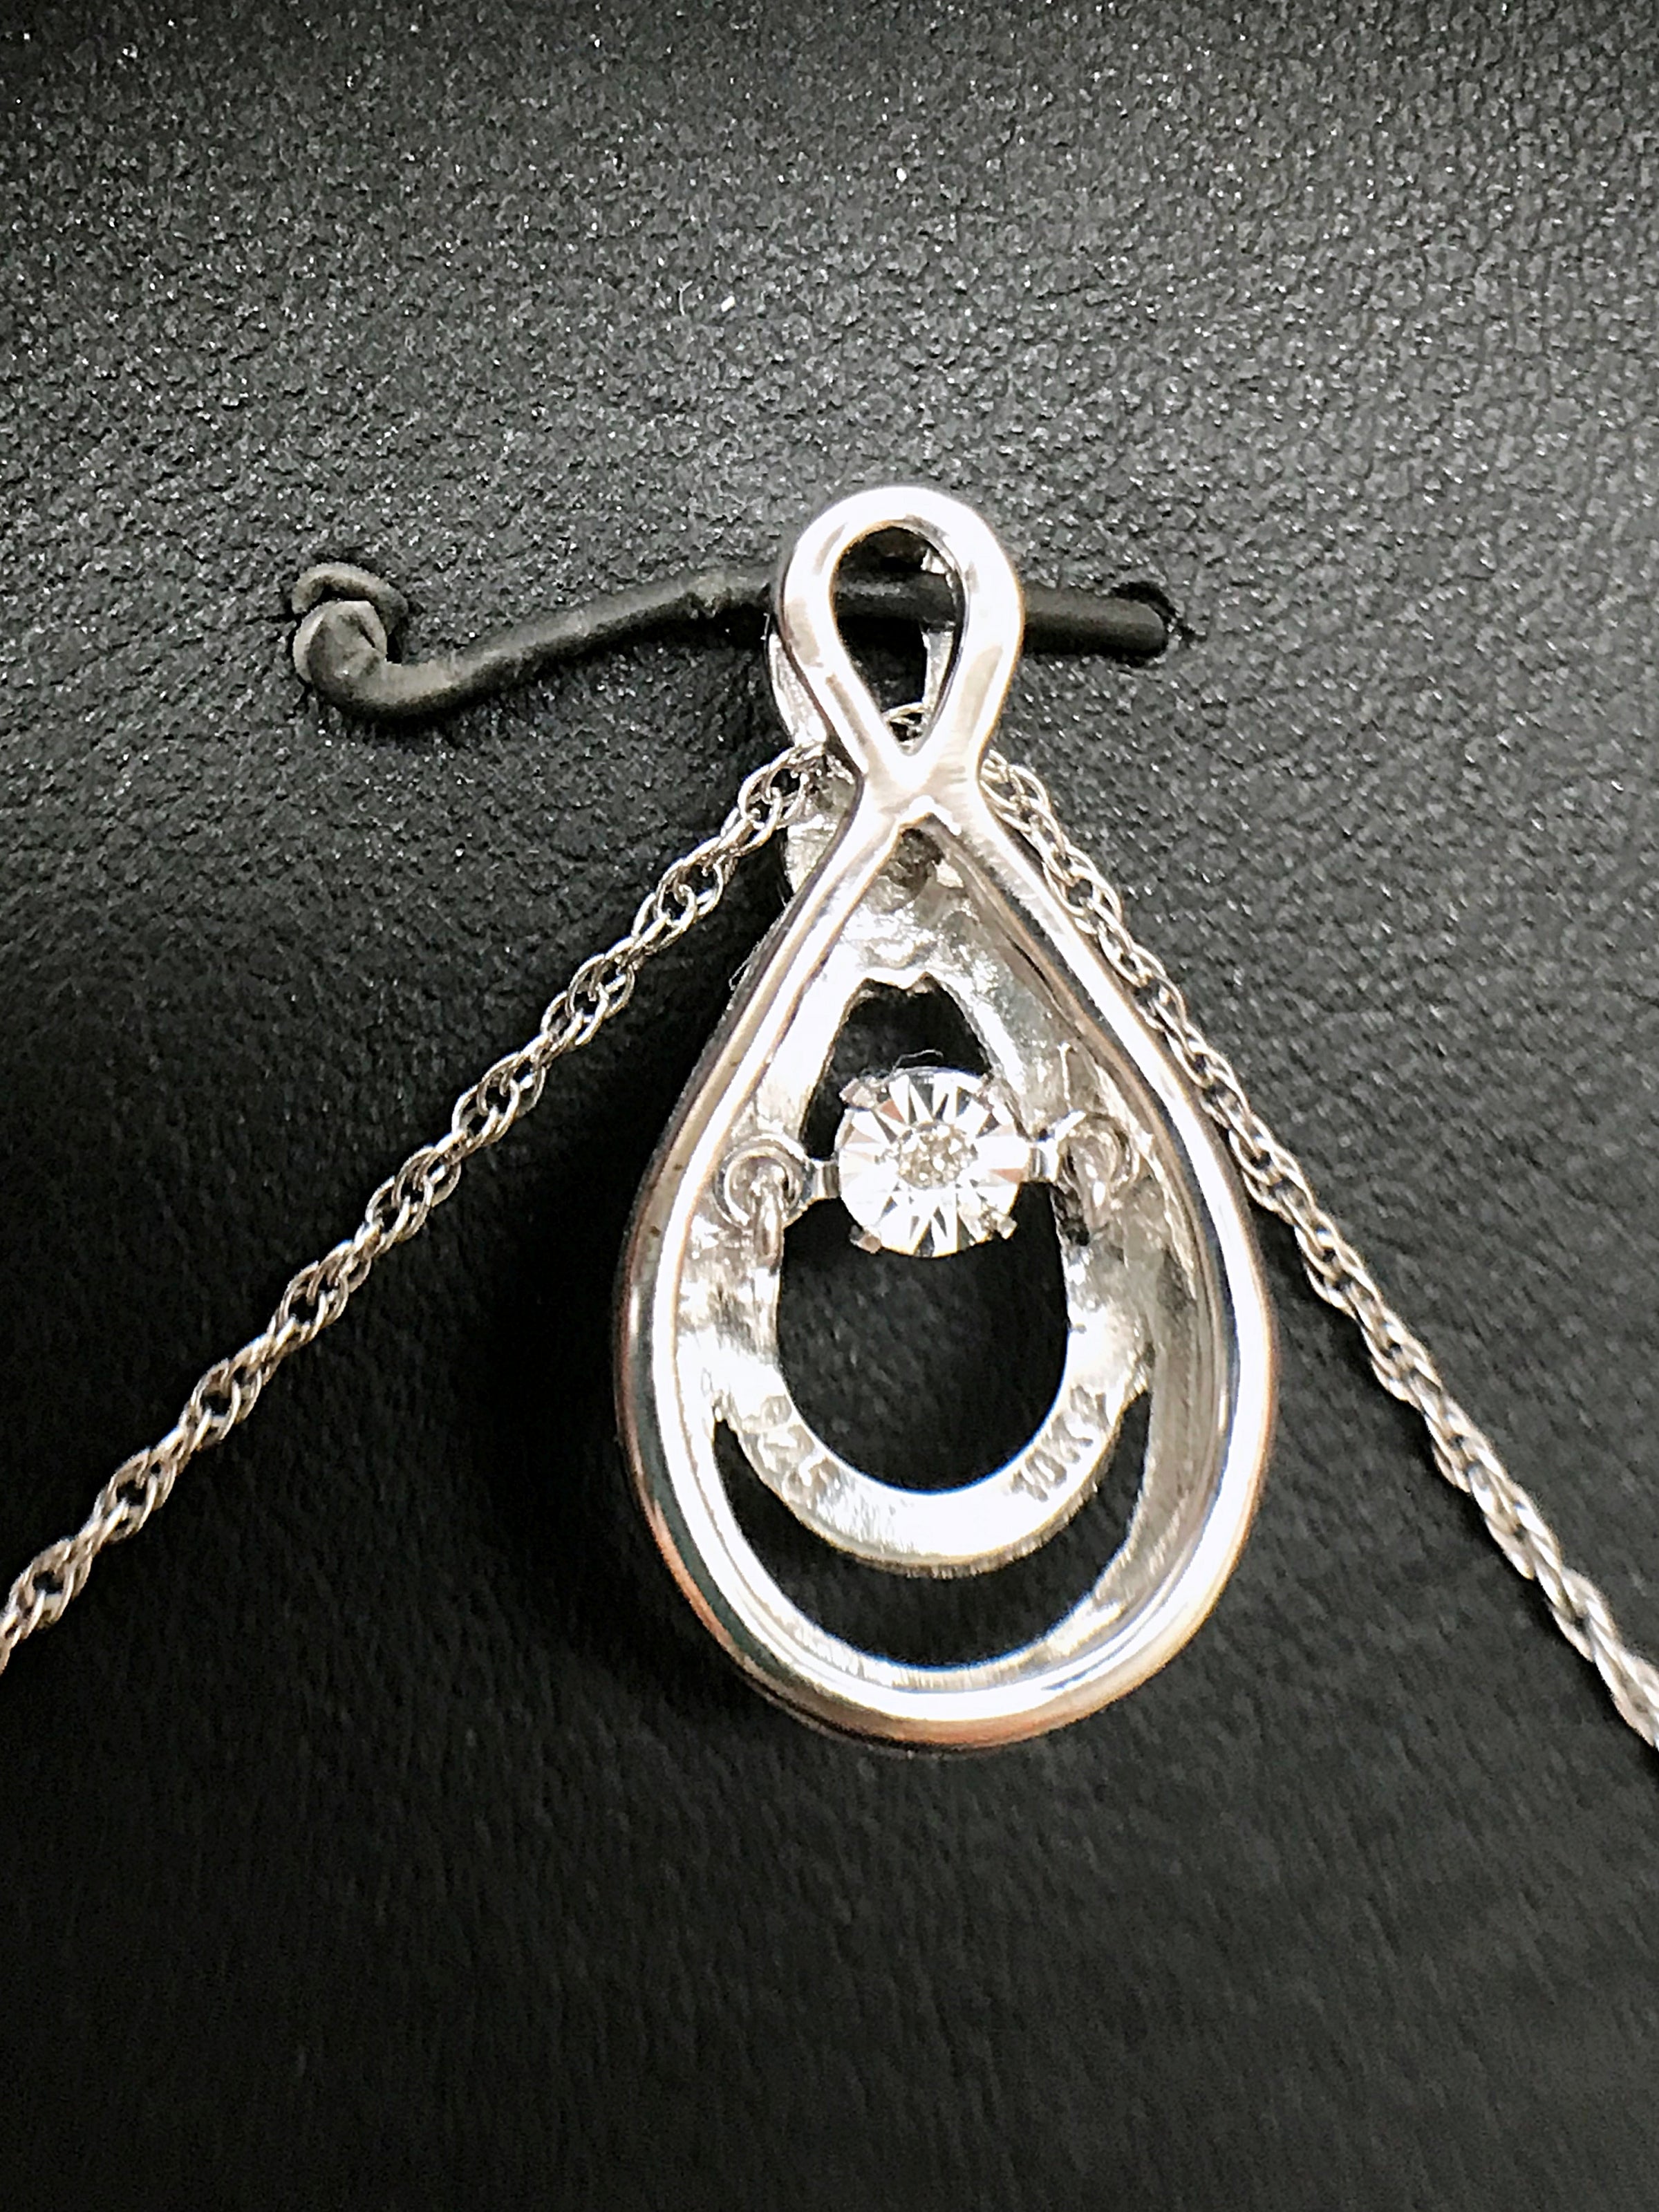 Loveboat Diamond Heart Pendant Necklace in Sterling and 10K Rose Gold - Hers and His Treasures